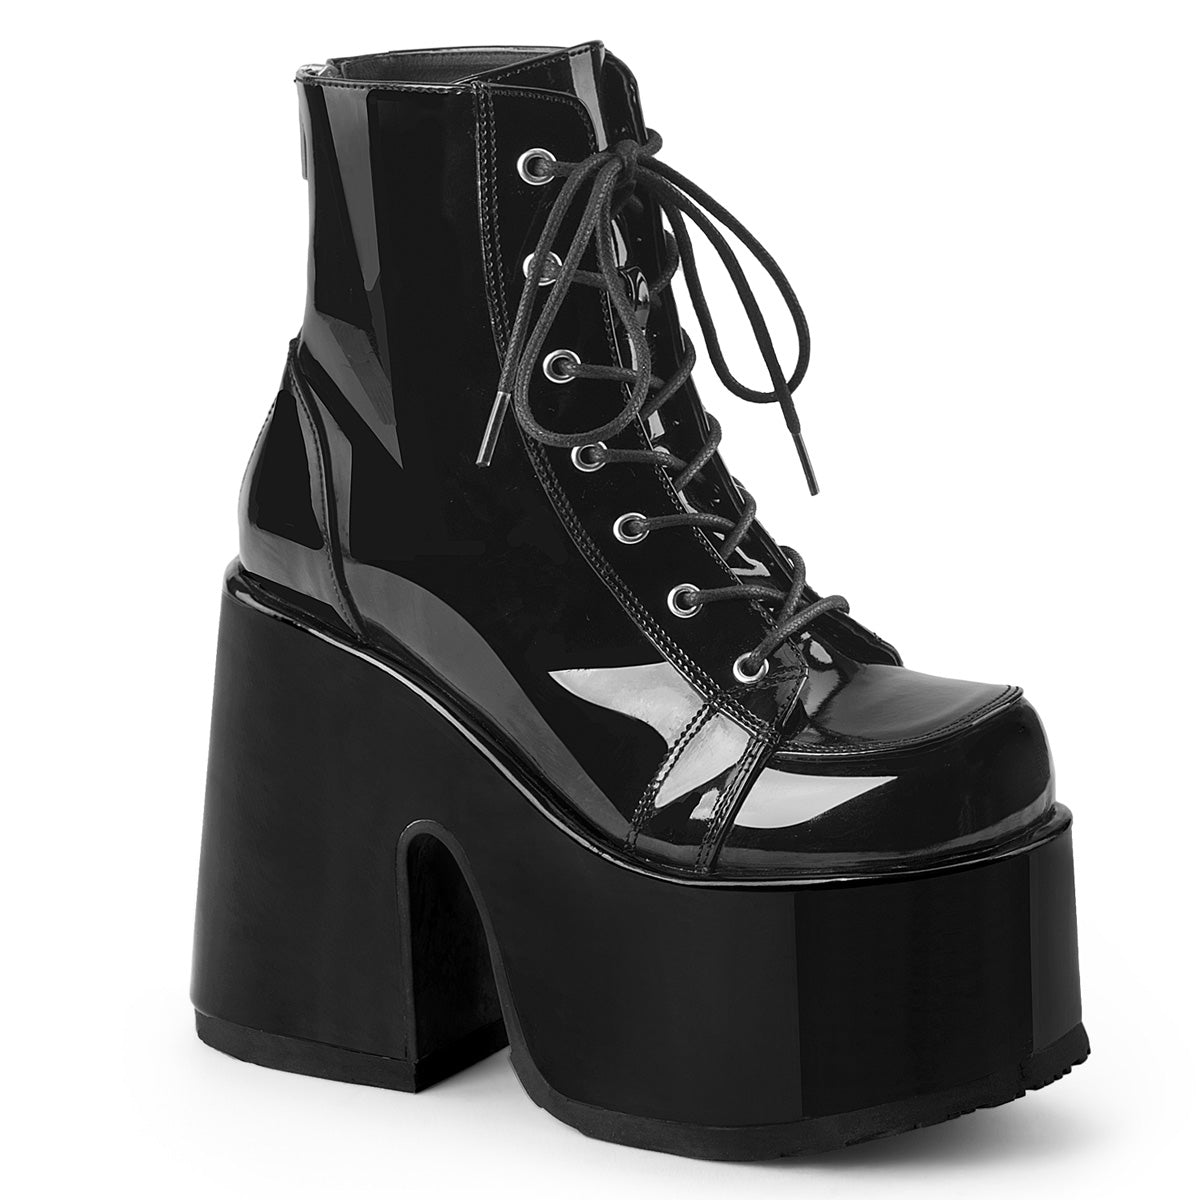 Too Fast | Demonia Camel 203 | Black Patent Leather Women's Ankle Boots